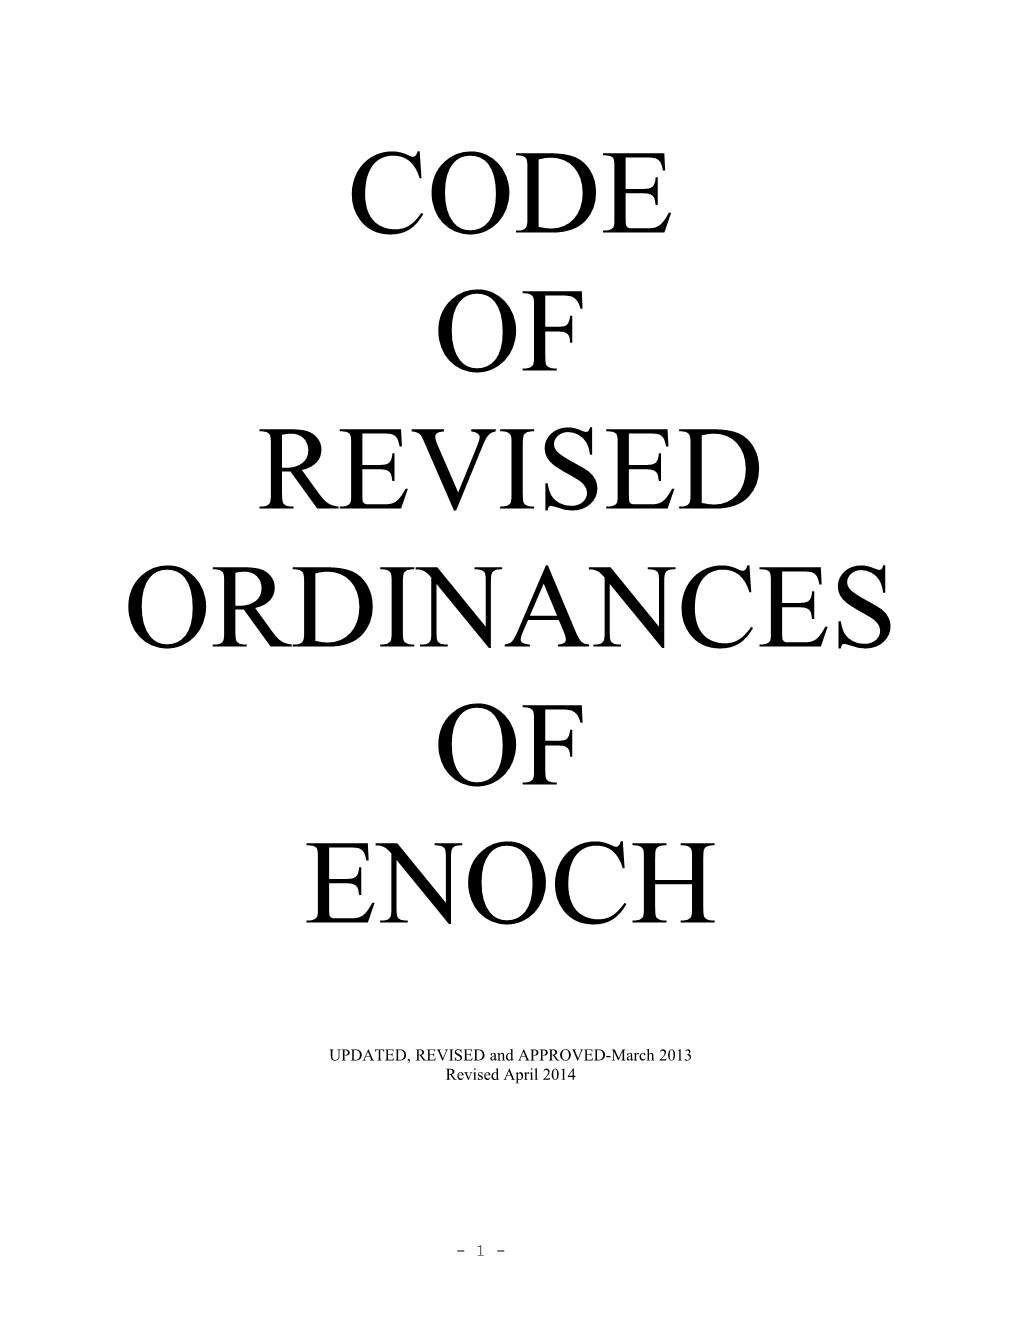 Code of Revised